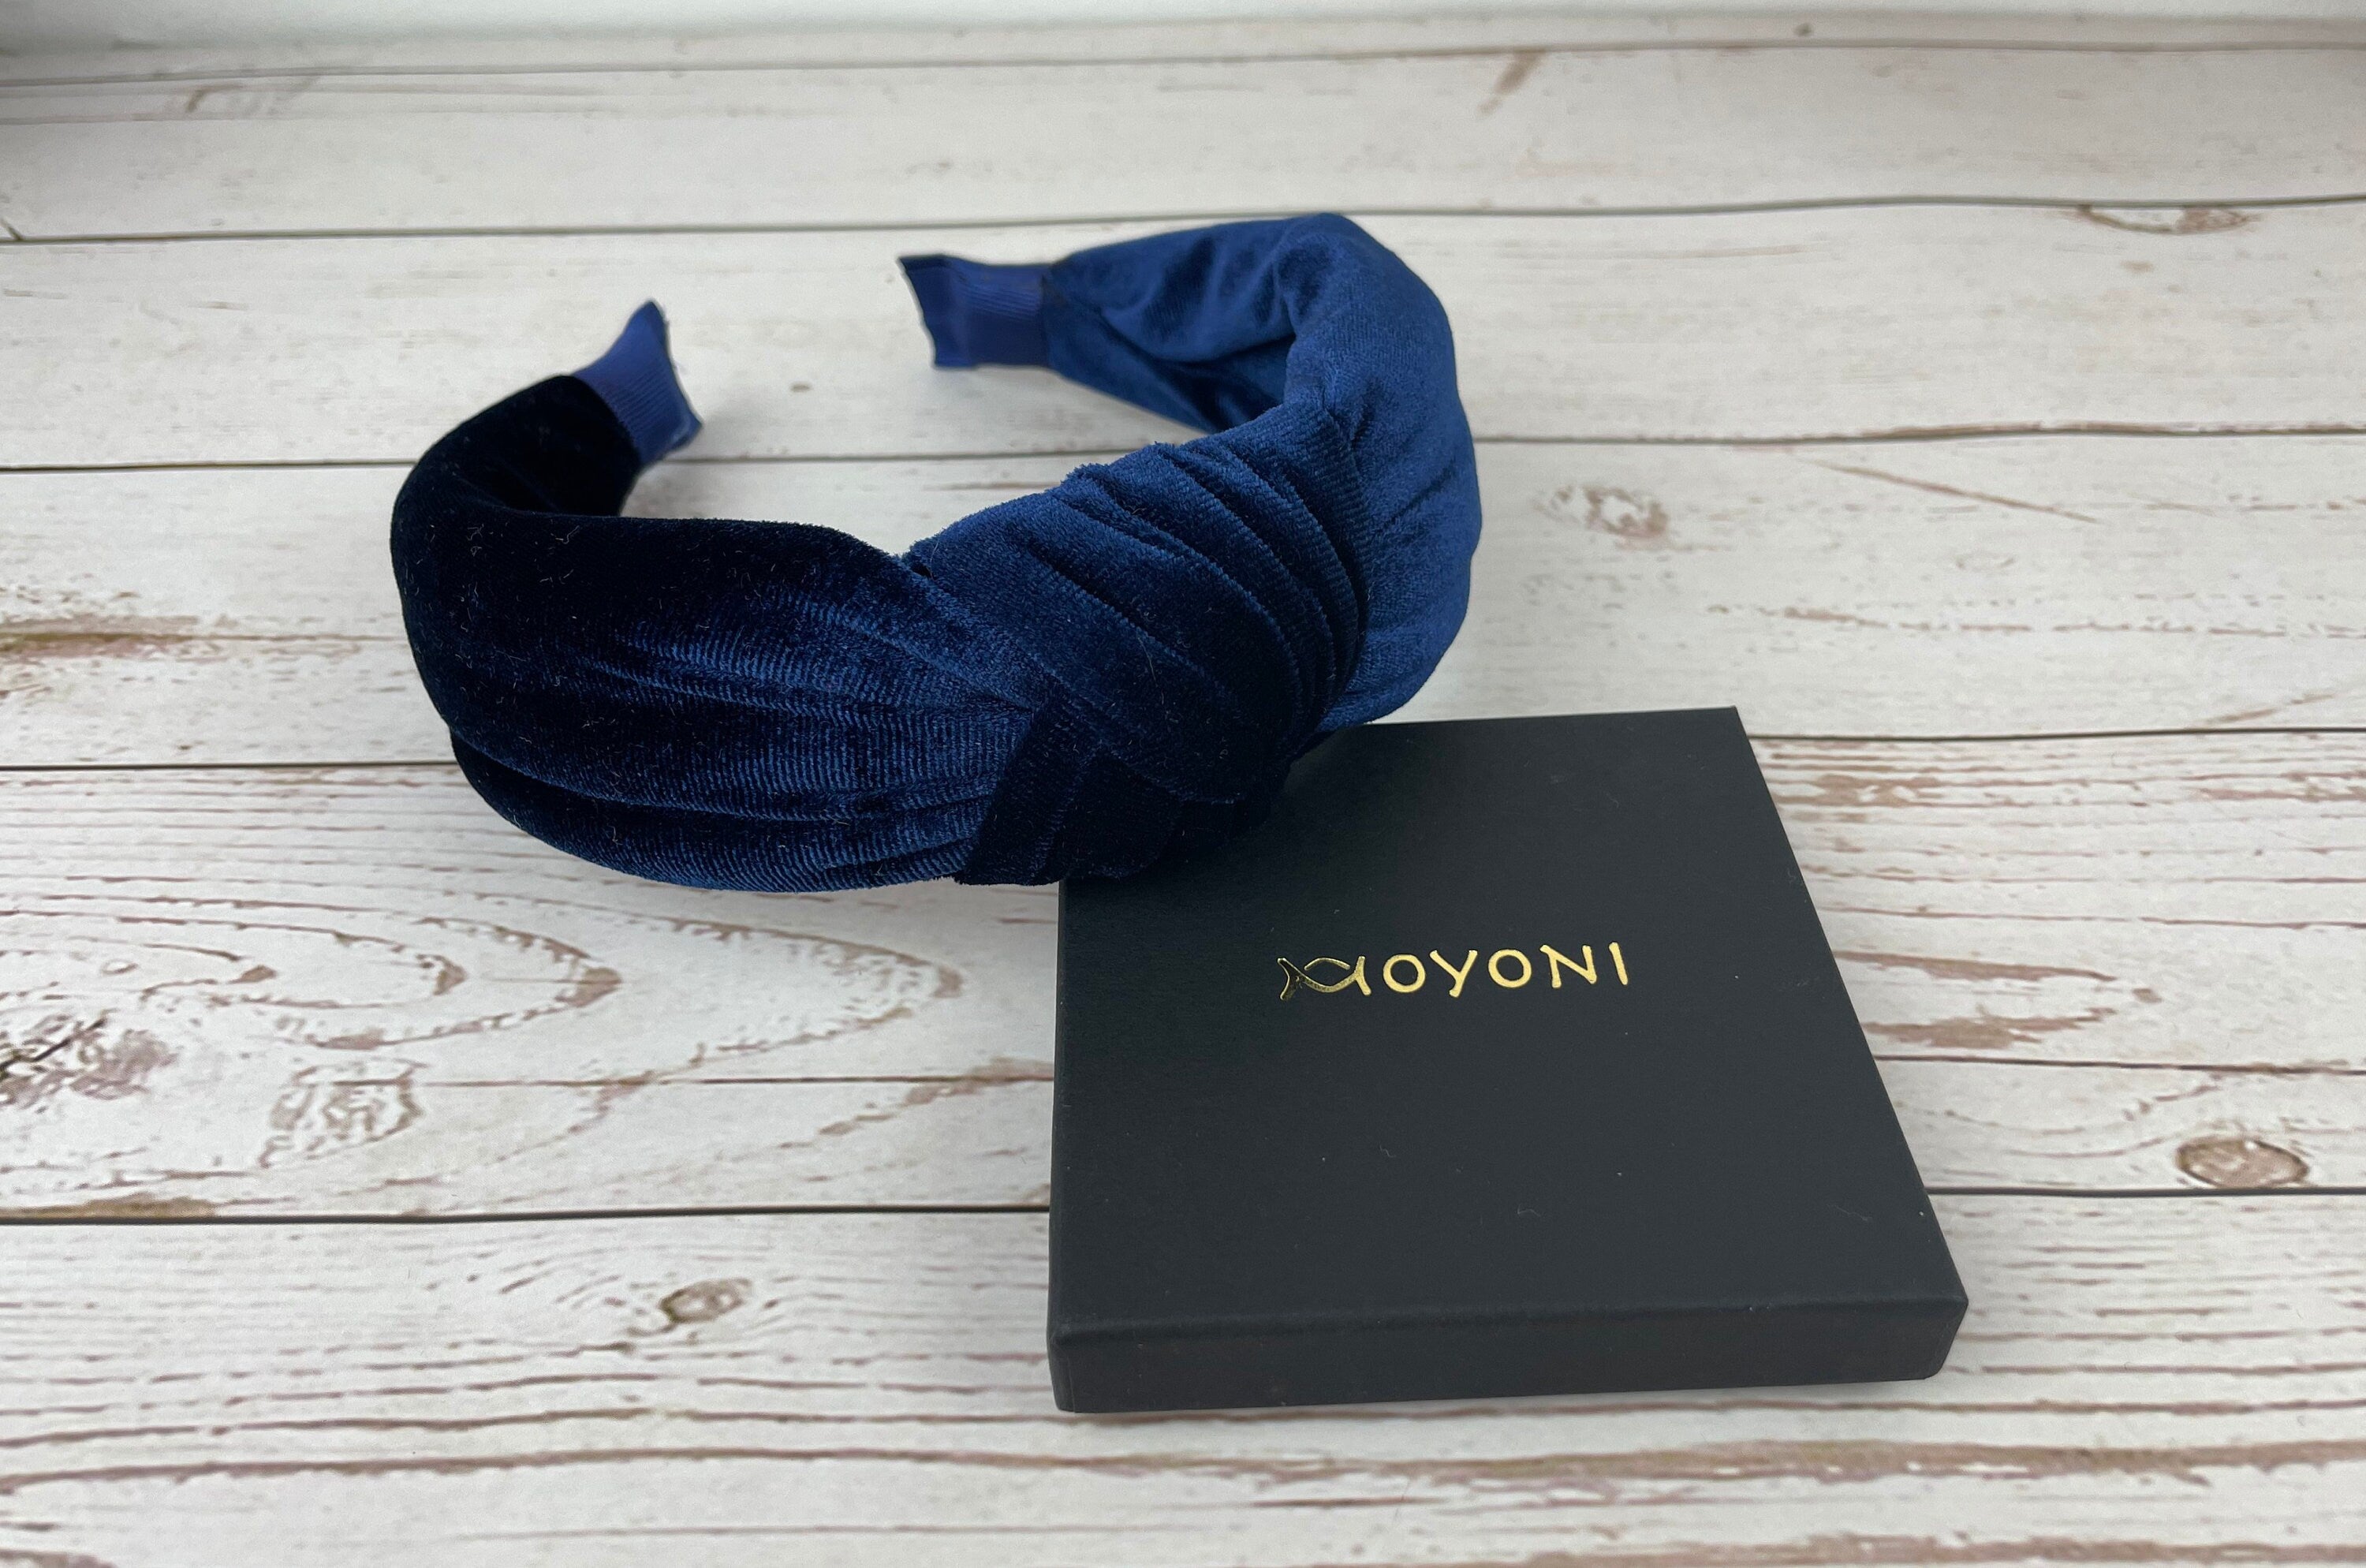 Add a touch of sophistication to your look with this Navy Blue Headband - perfect for both casual and formal occasions.